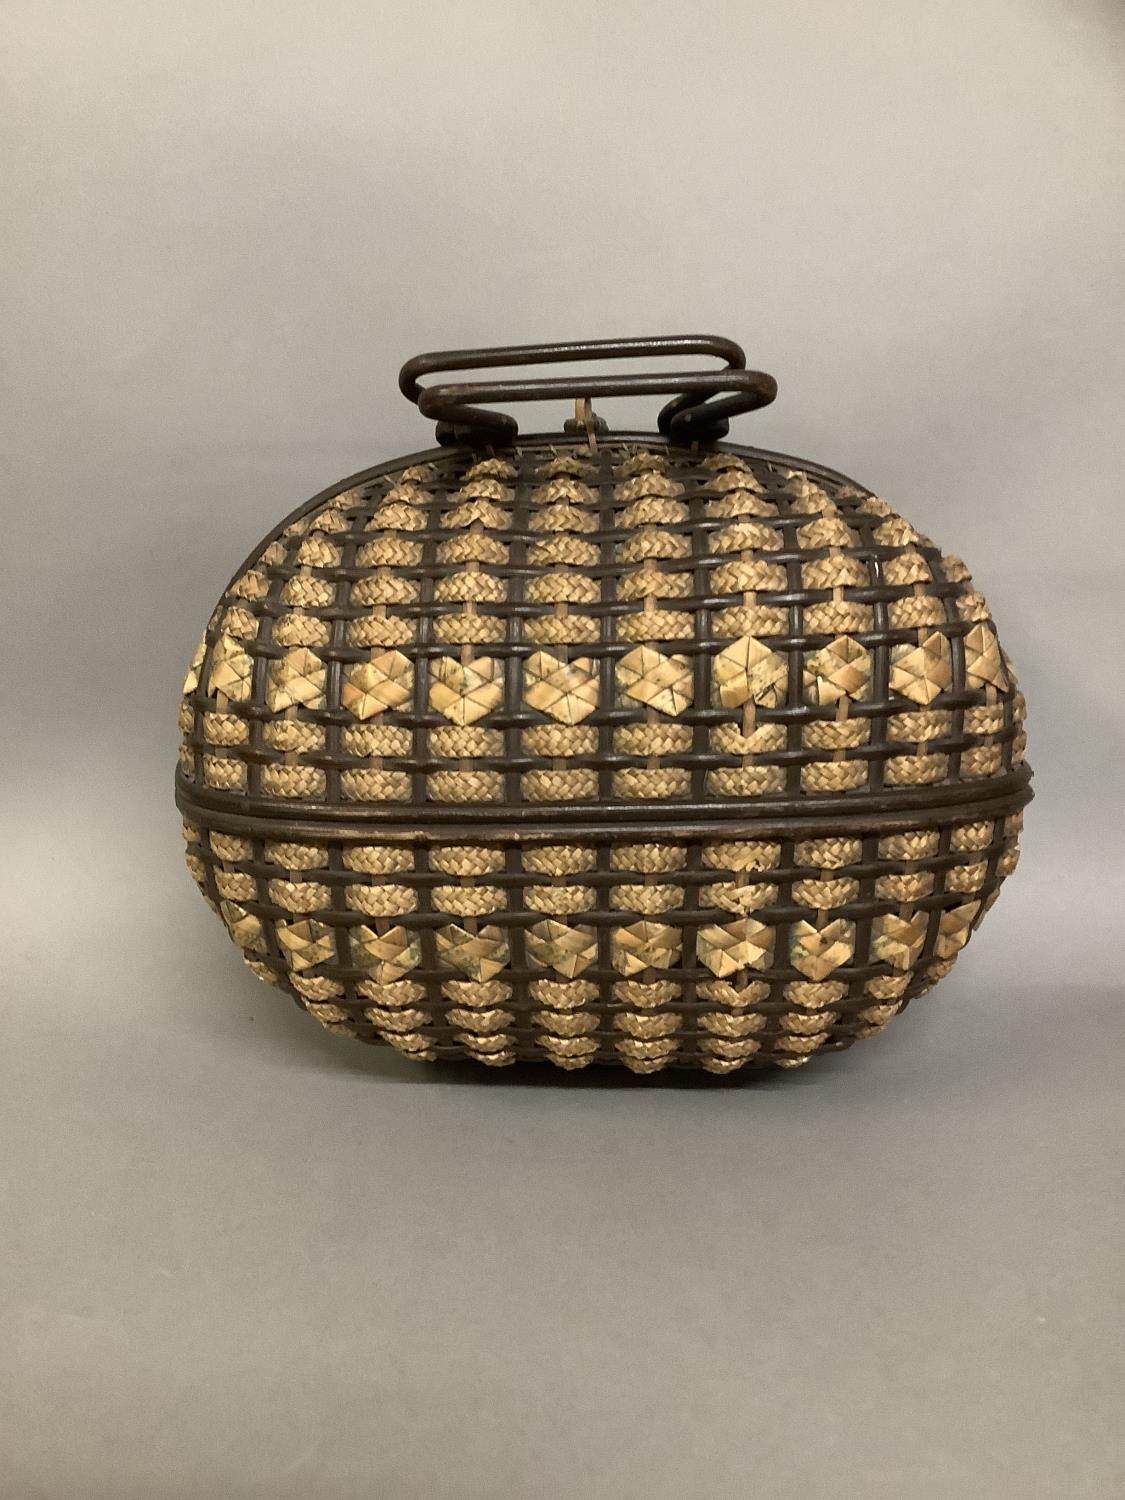 A Victorian lady’s honeycomb basket, in oval form, a work basket for sewing requisites, wood